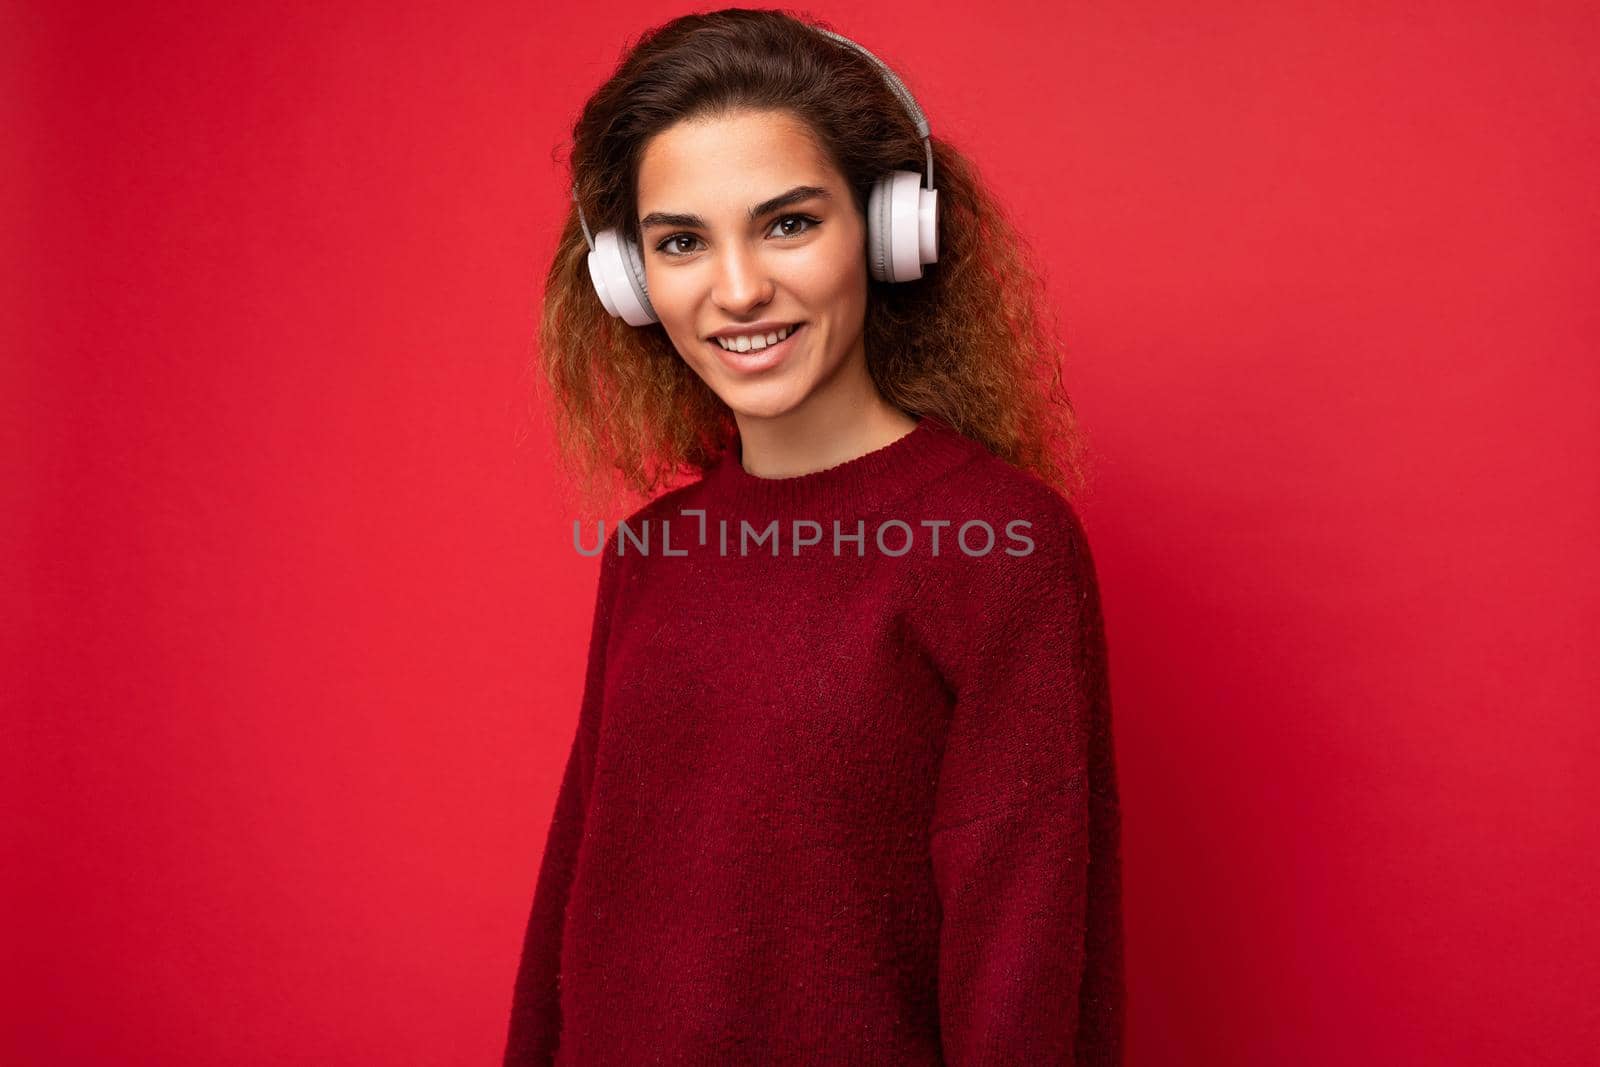 Beautiful happy smiling young brunette curly woman wearing dark red sweater isolated over red background wall wearing white bluetooth headphones listening to music and having fun looking at camera.